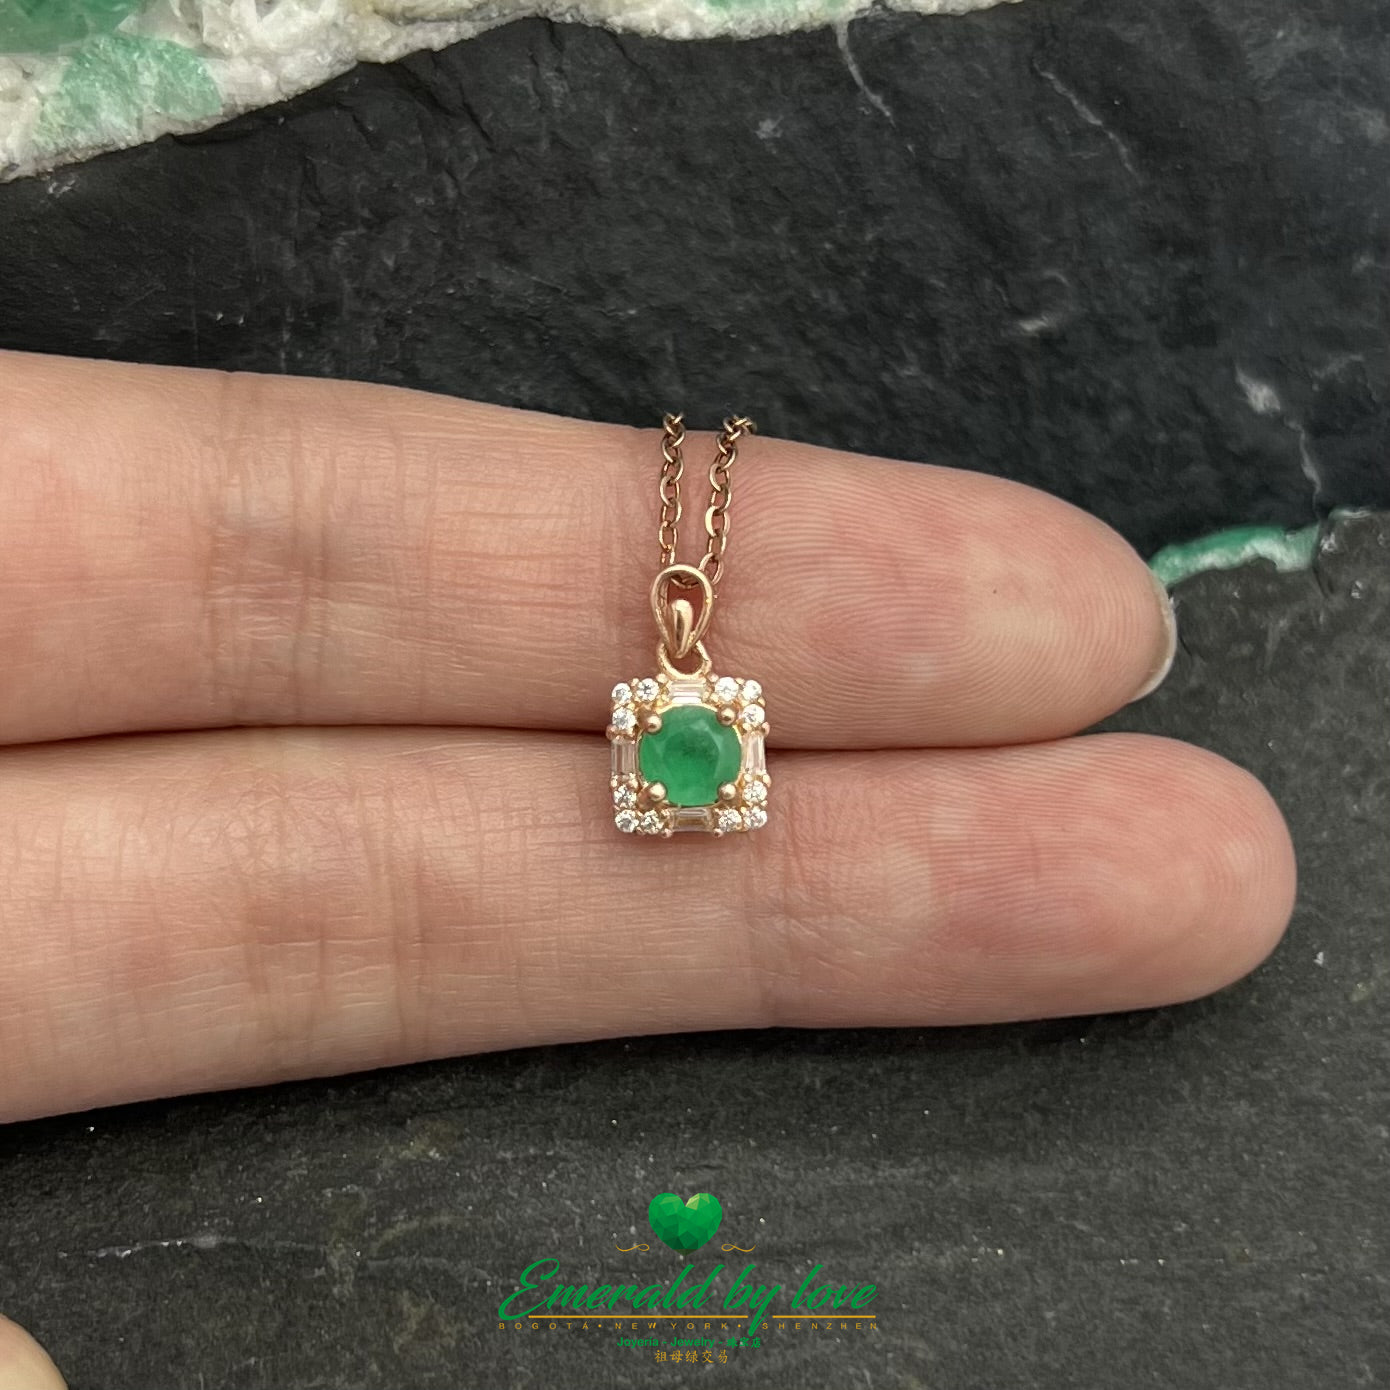 Rose Gold-Plated Sterling Silver Pendant with Natural Round Emerald